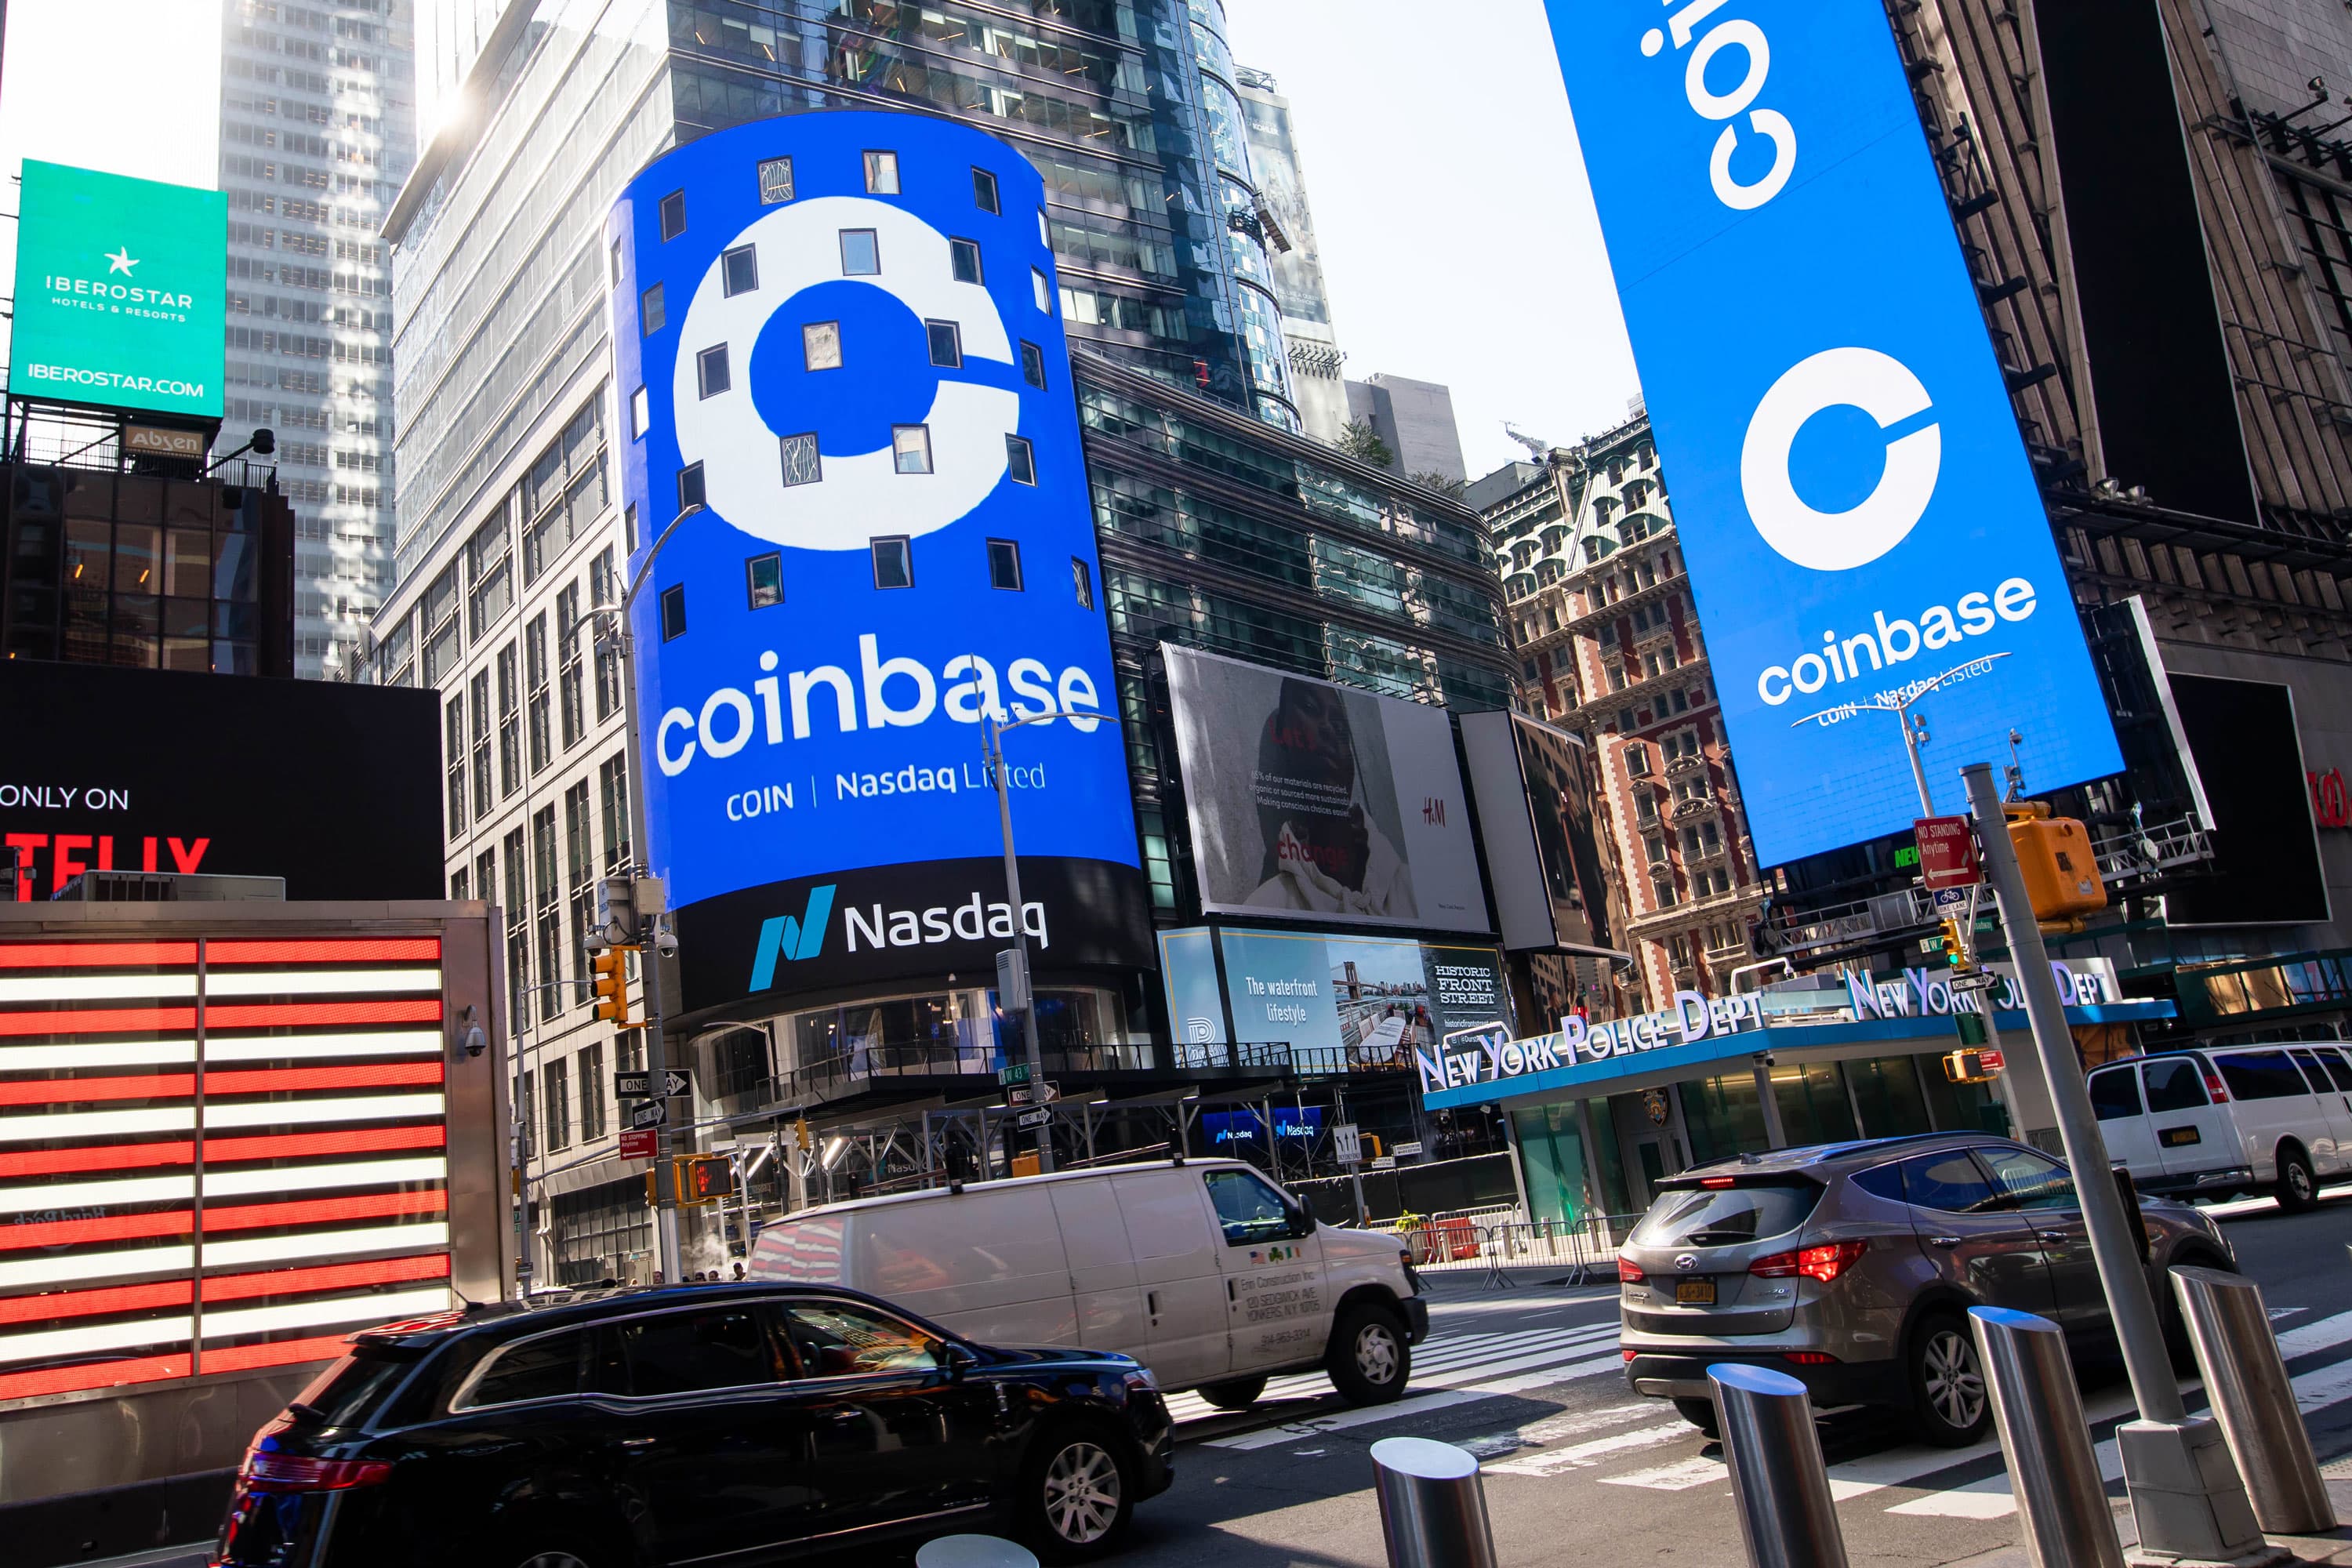 The investment case for next-generation trading stocks like Coinbase and SoFi despite crypto contagion